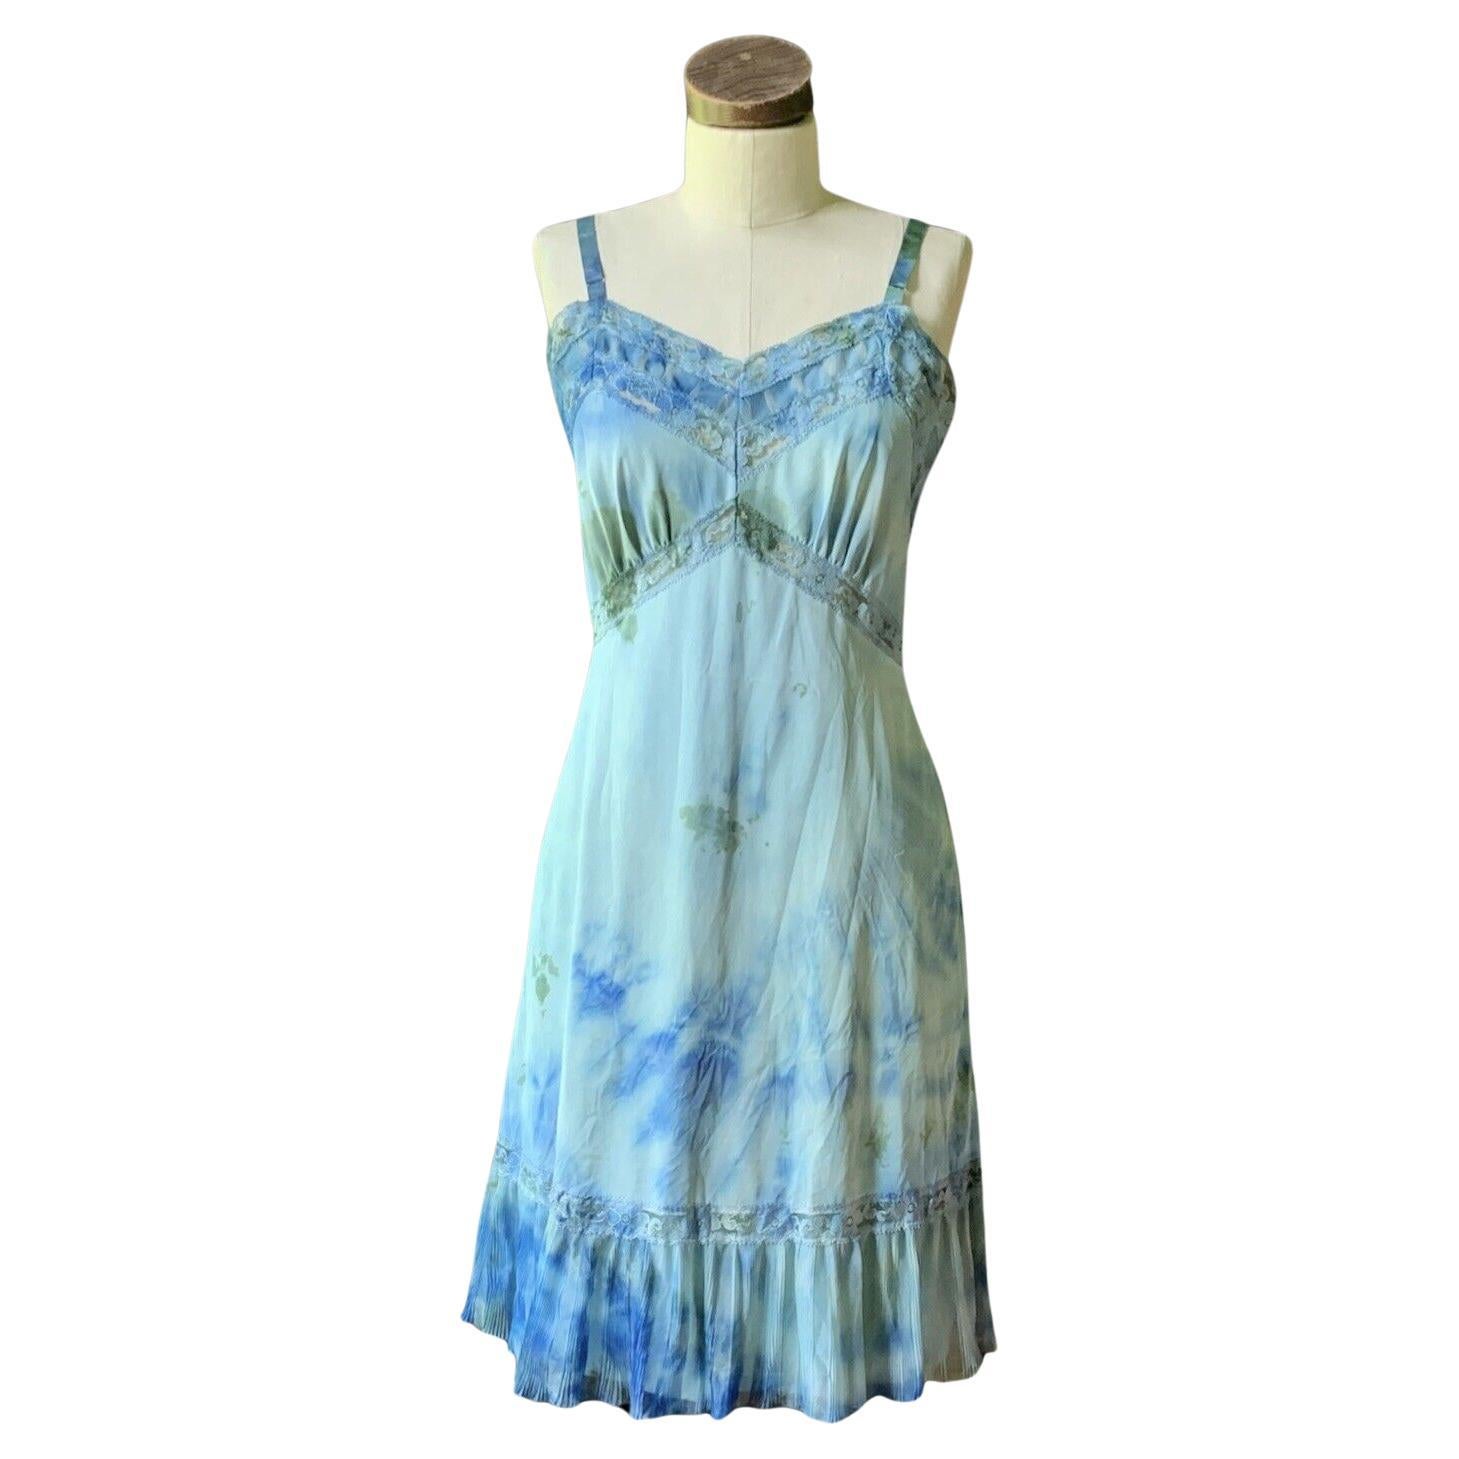 DYED PETALS Vintage Hand Botanically Dyed Tie-Dyed Slip Dress S/M 34